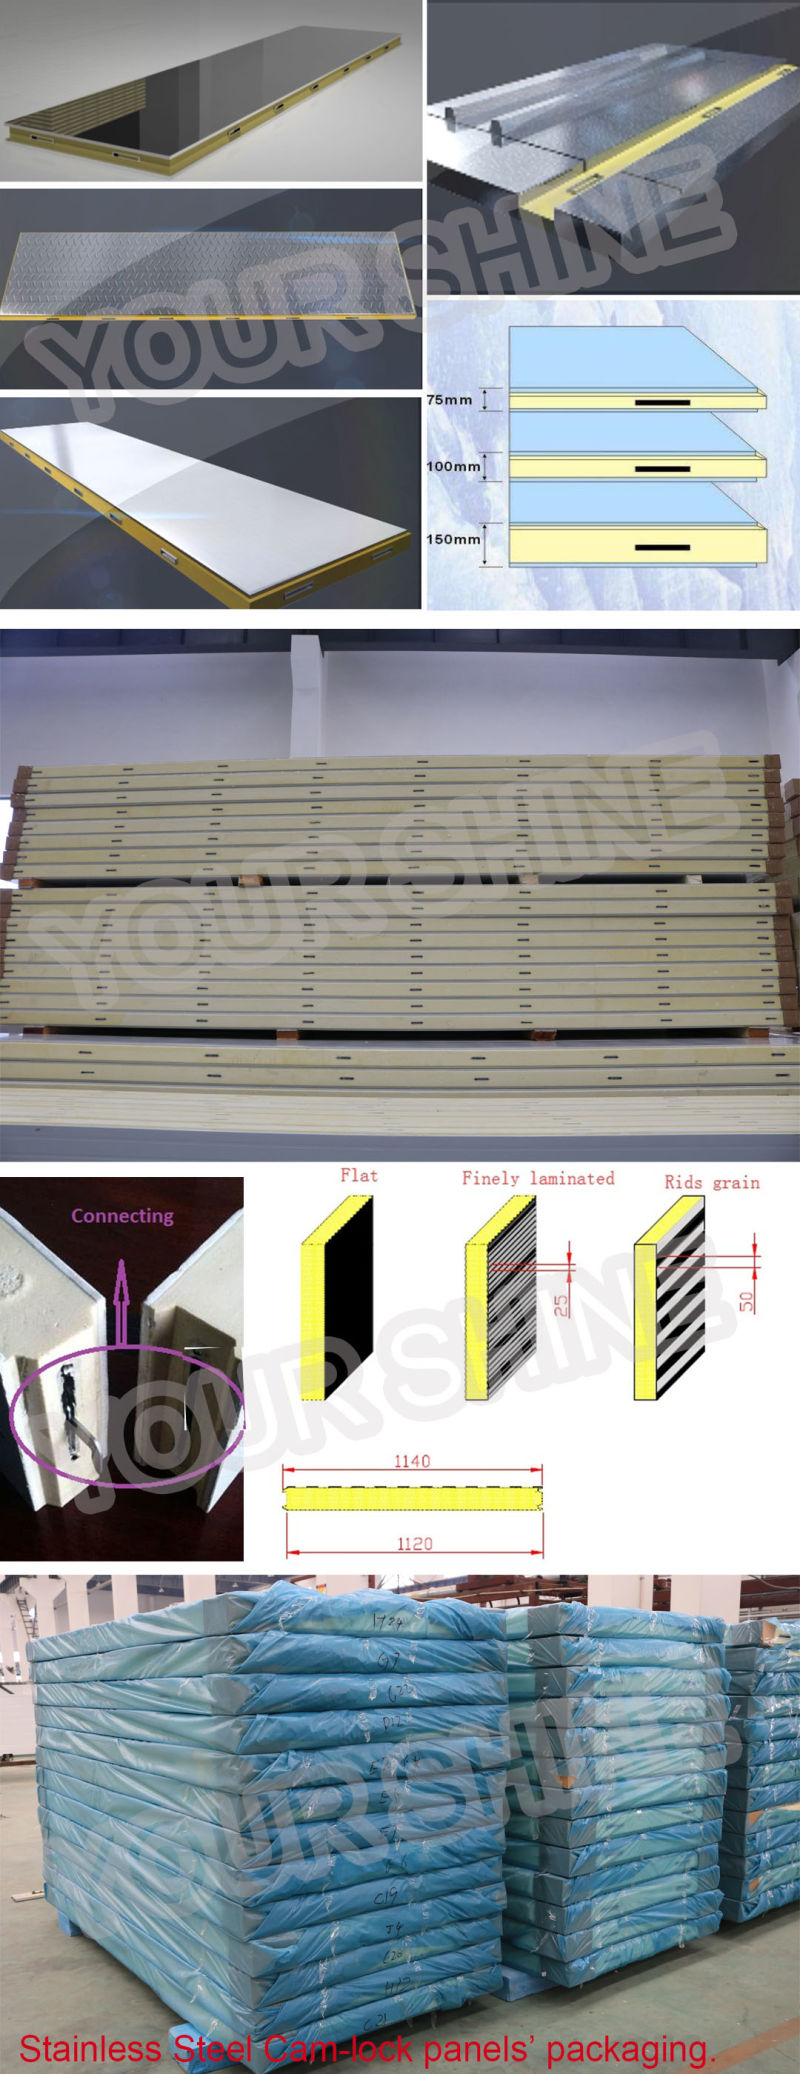 100mm Soundproof Insulated PU Sandwich Wall Panel for Cold Room